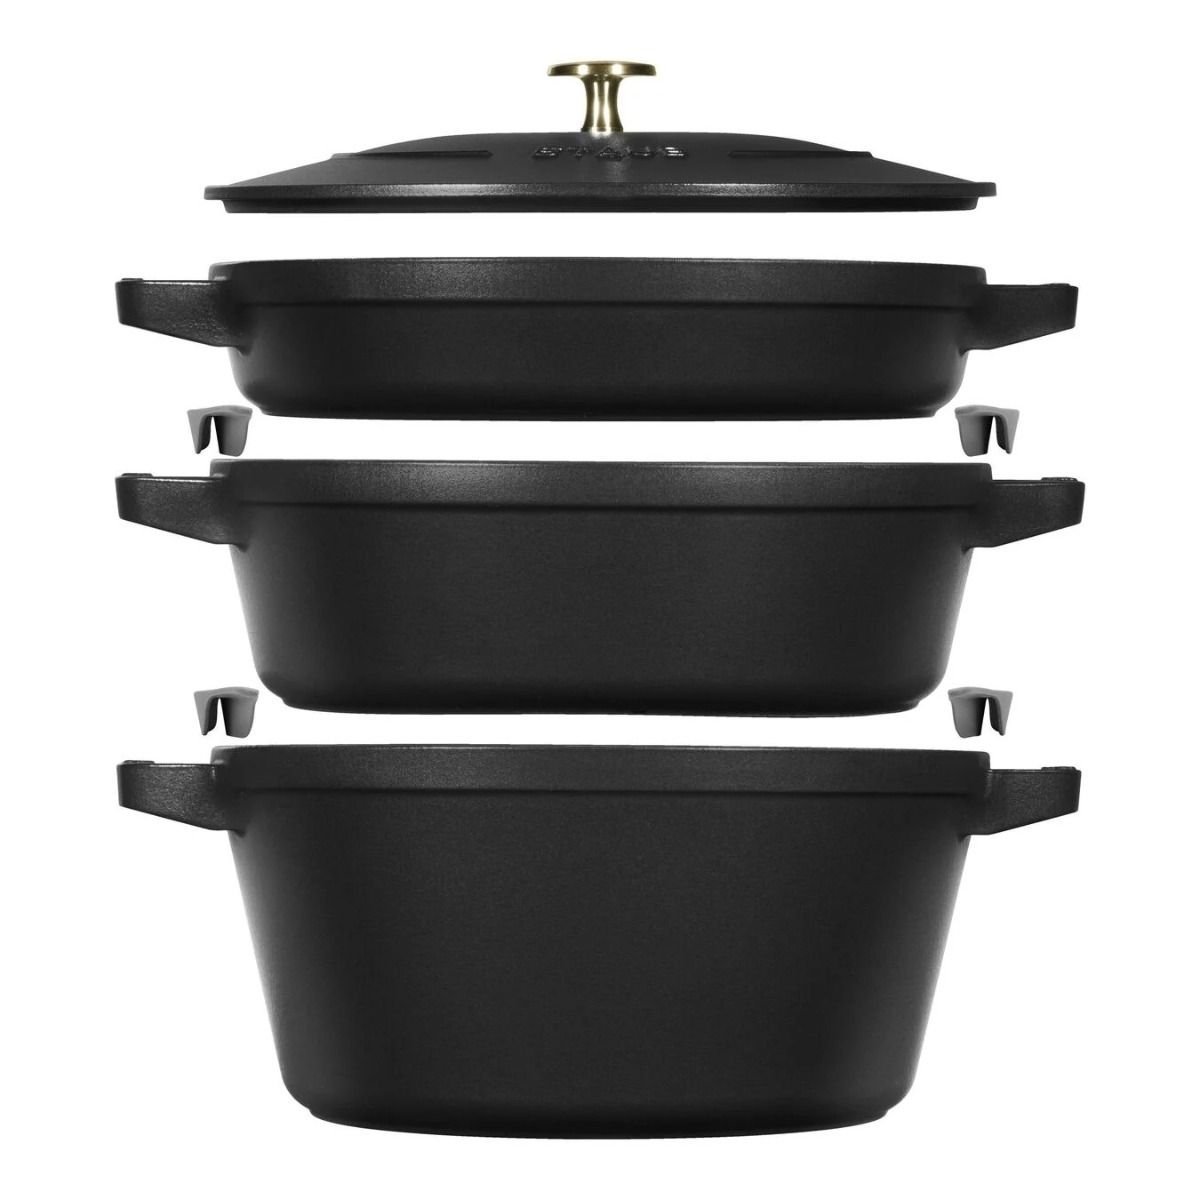 CAROTE 10 Pcs Non -Stick Cookware Set- FULL REVIEW 